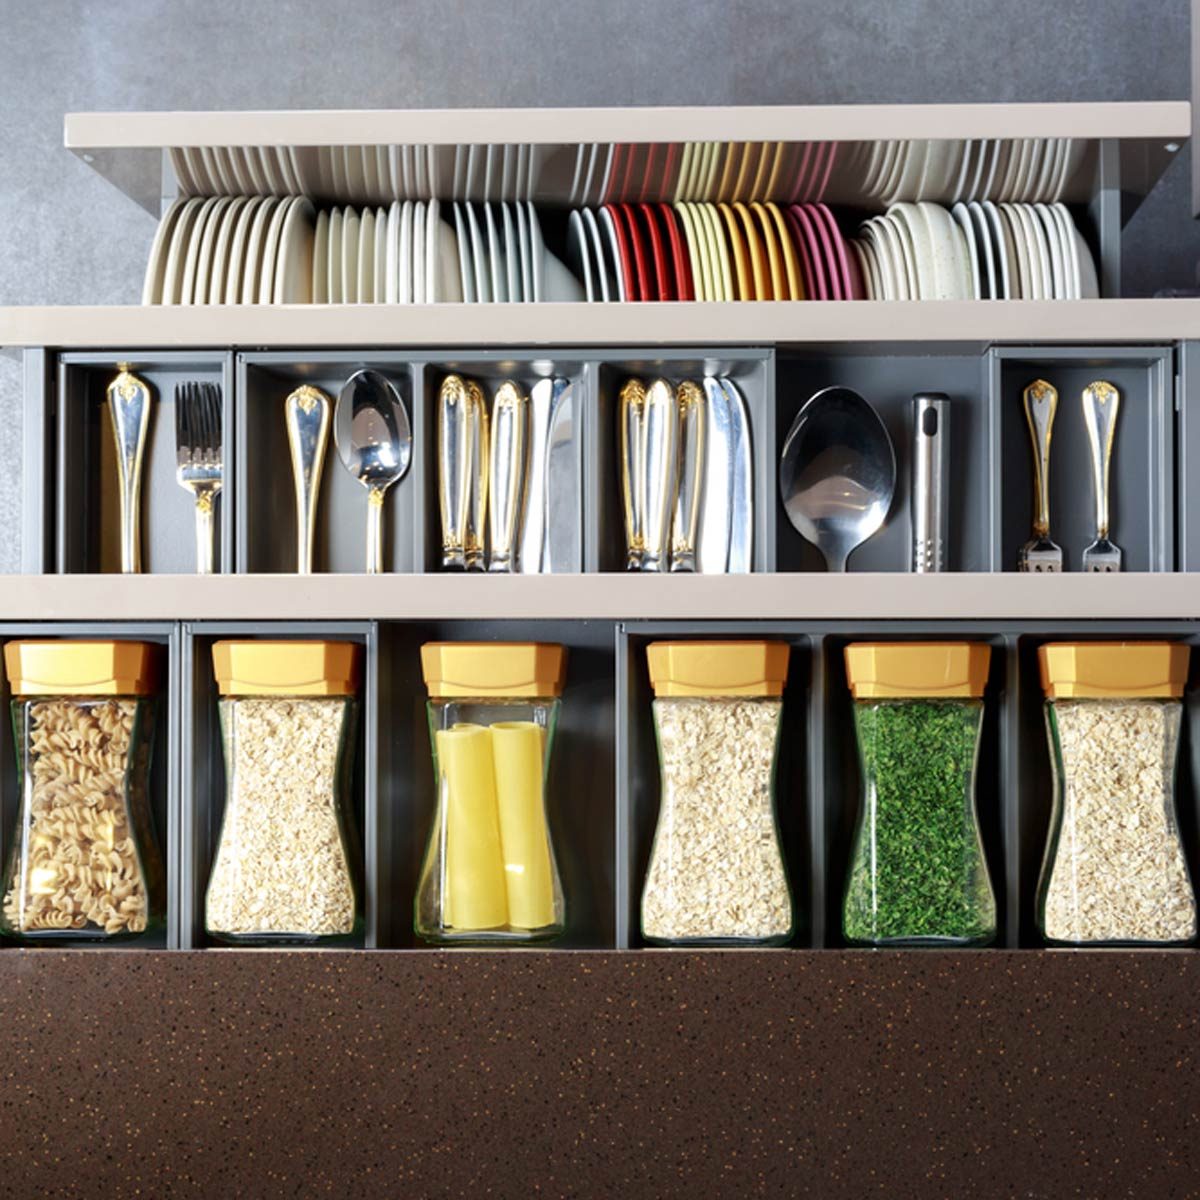 Spice Rack Organizer: Put Favorites Front and Center